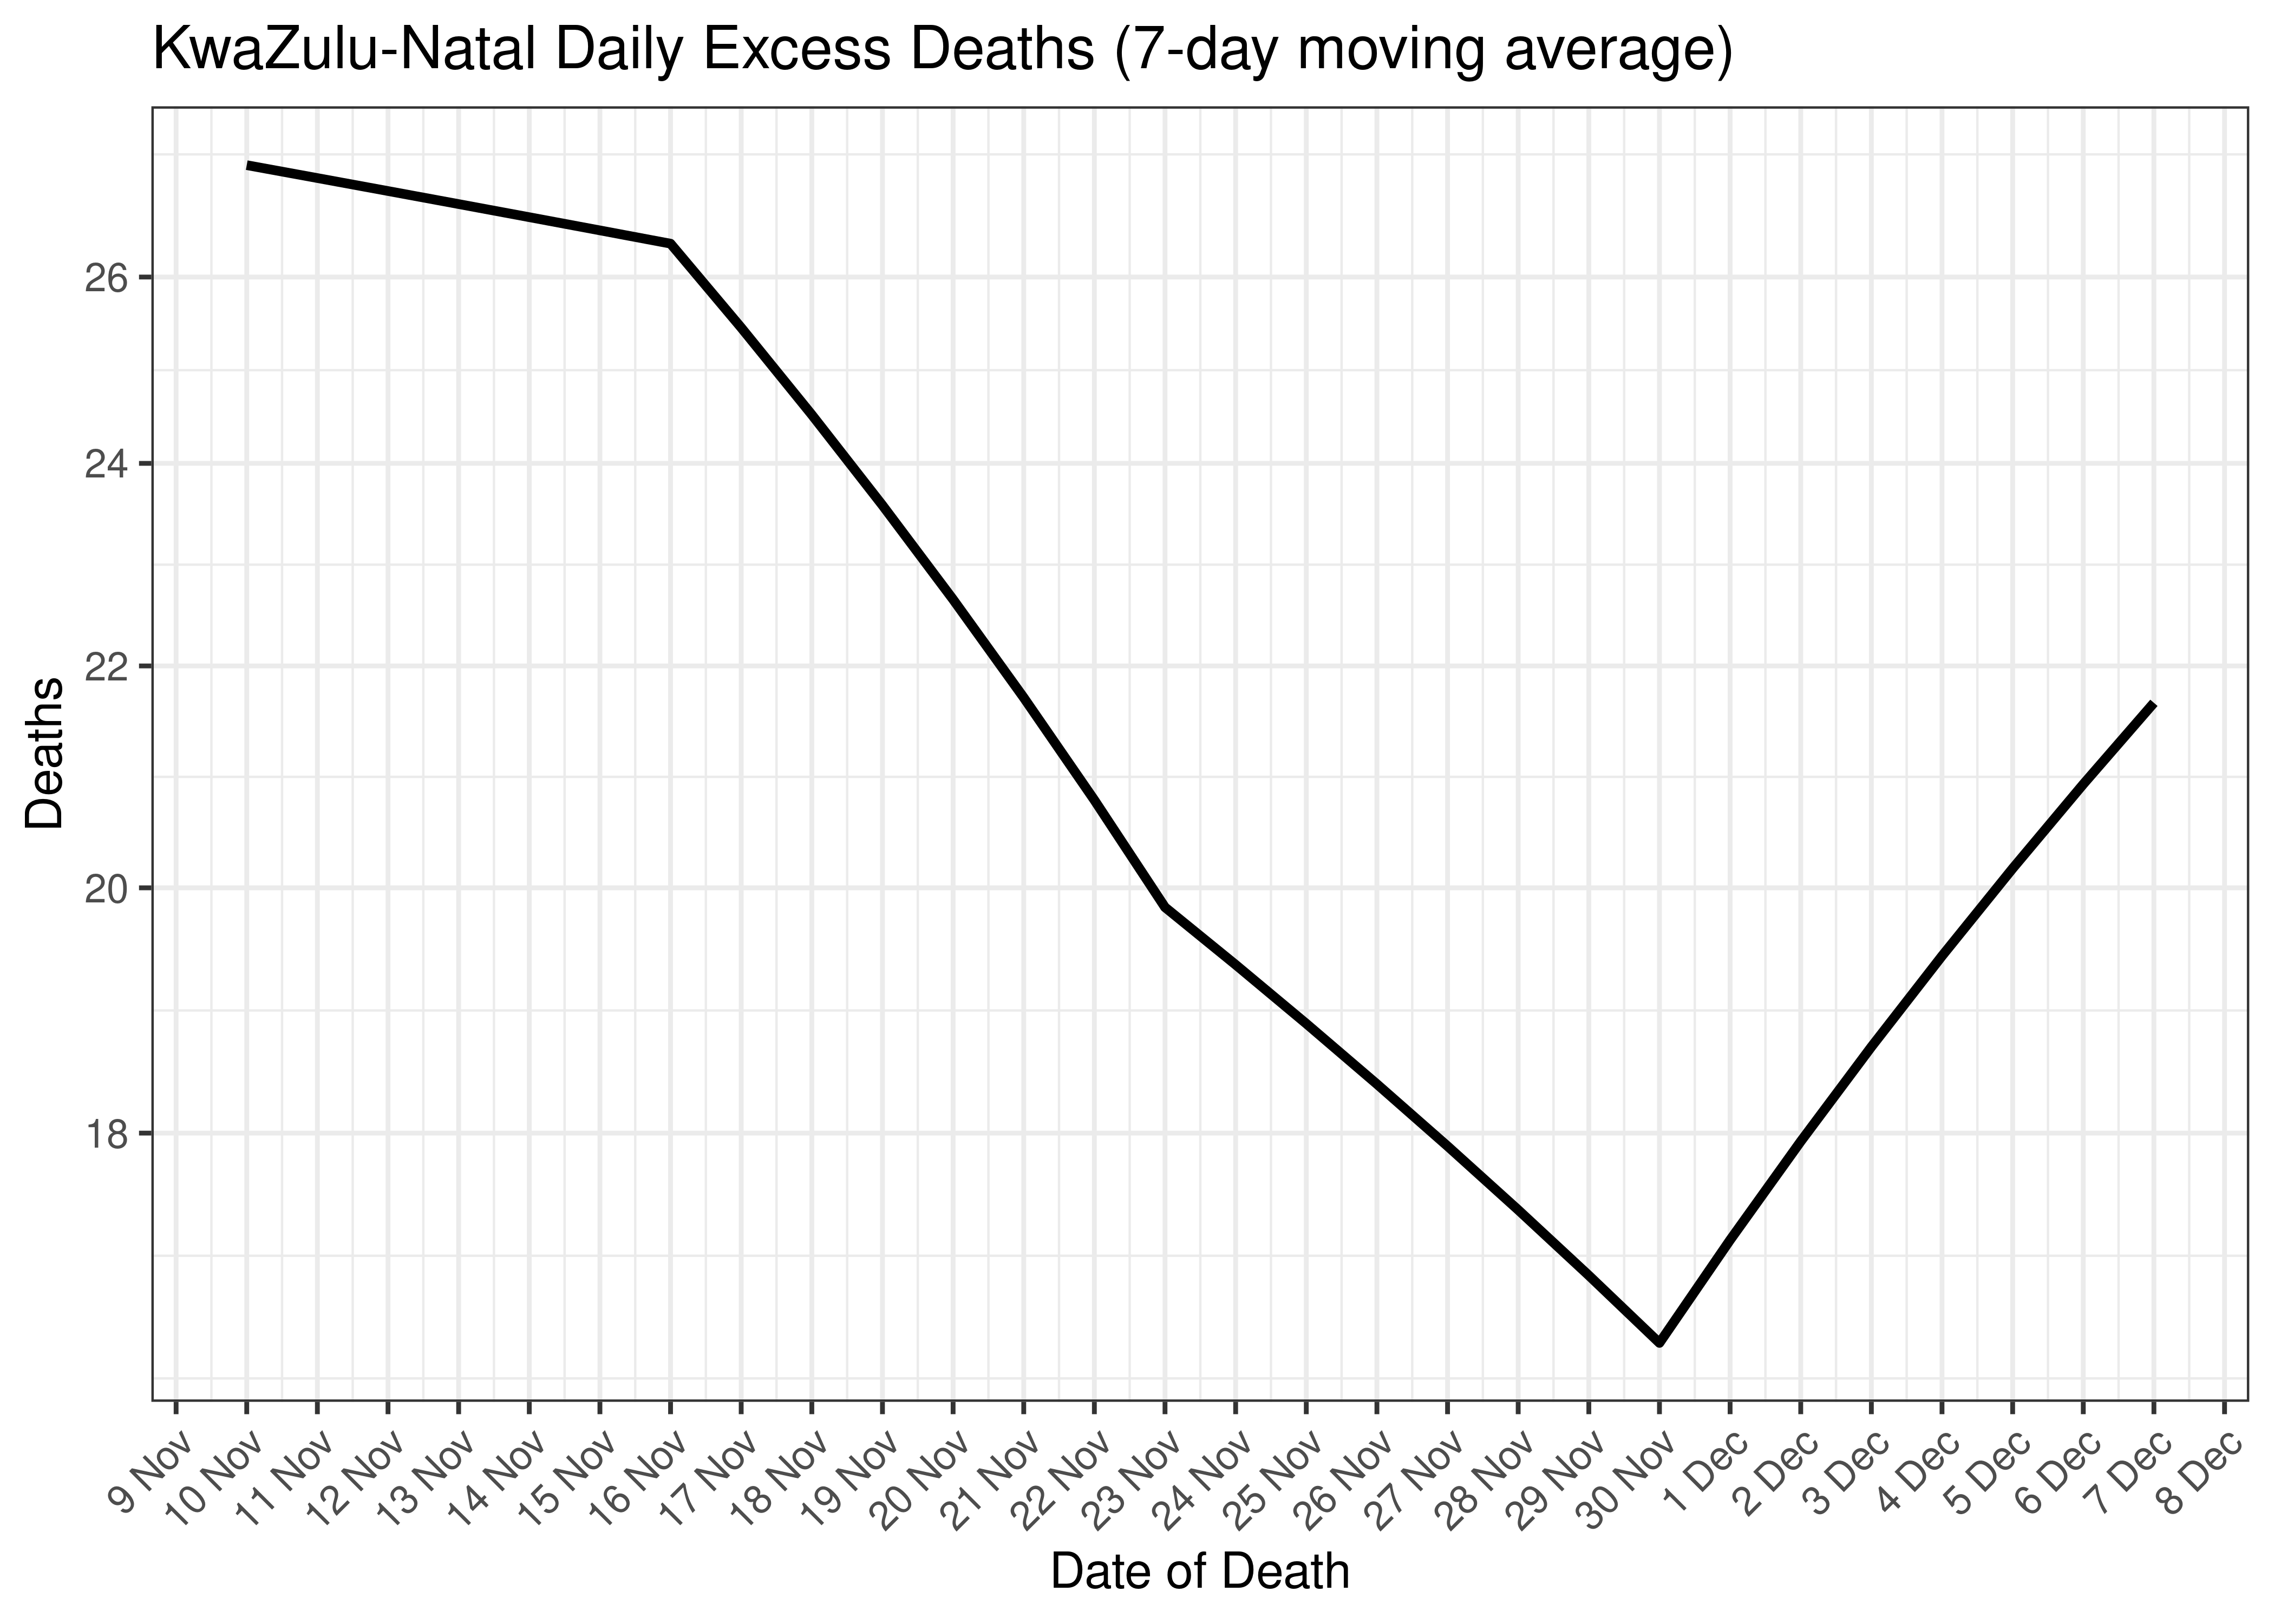 KwaZulu-Natal Daily Excess Deaths for Last 30-days (7-day moving average)